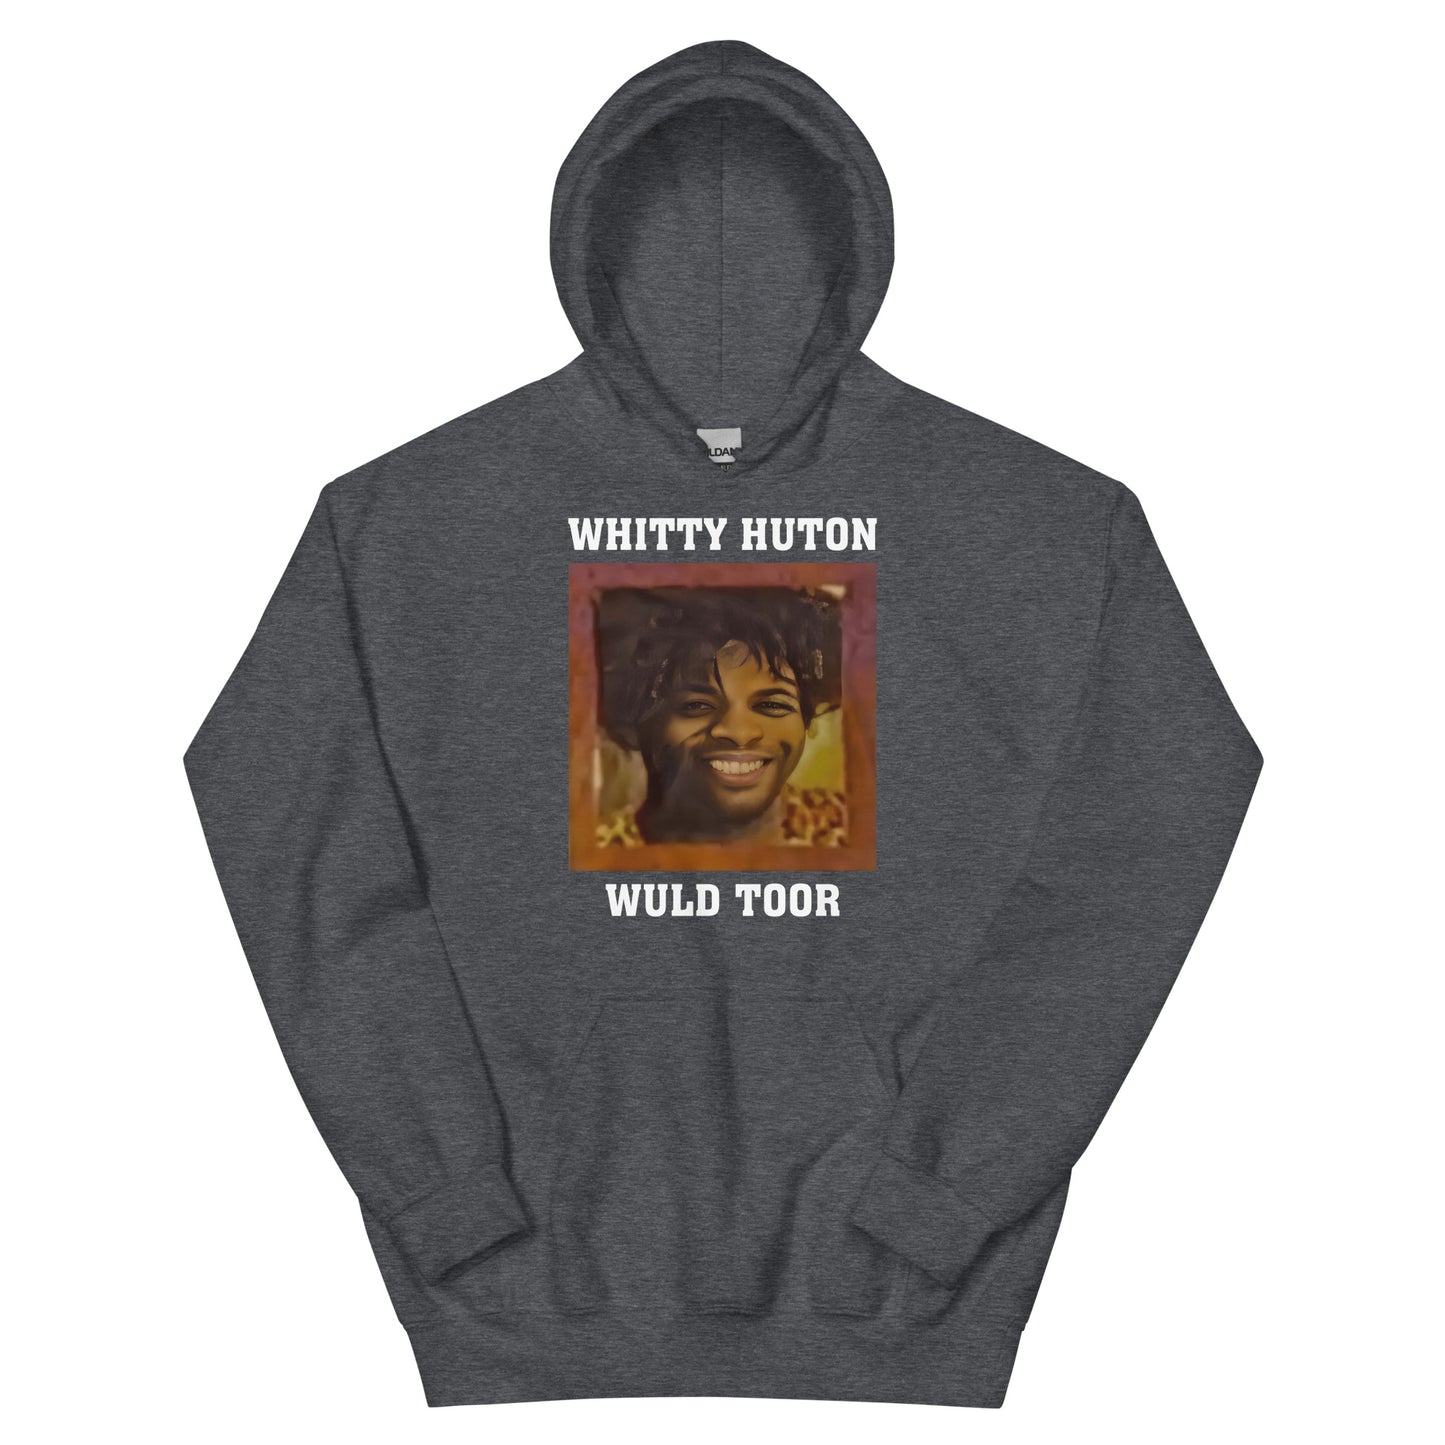 Primacy Whitty Hutton Hoodie